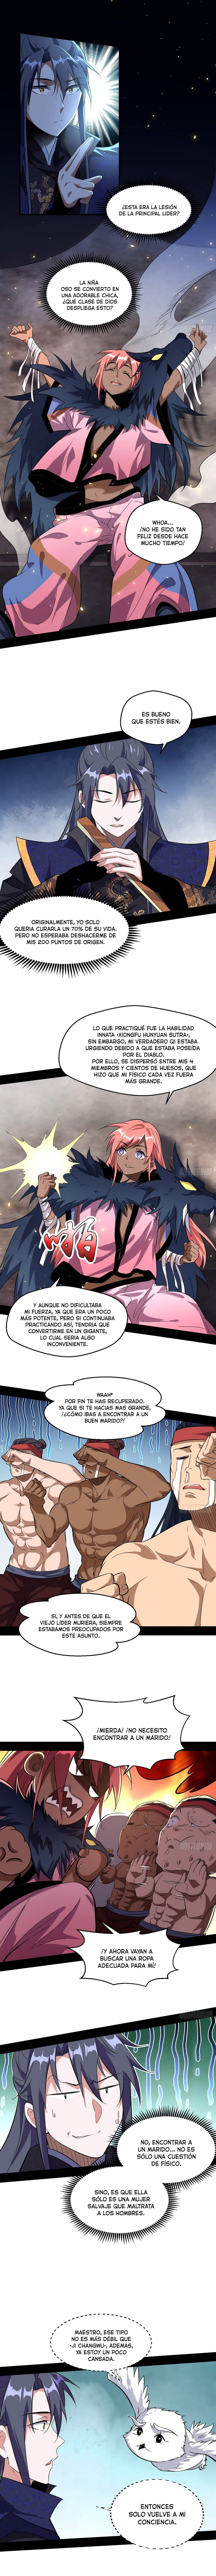 Manga Soy un dios maligno Chapter 76 image number 8